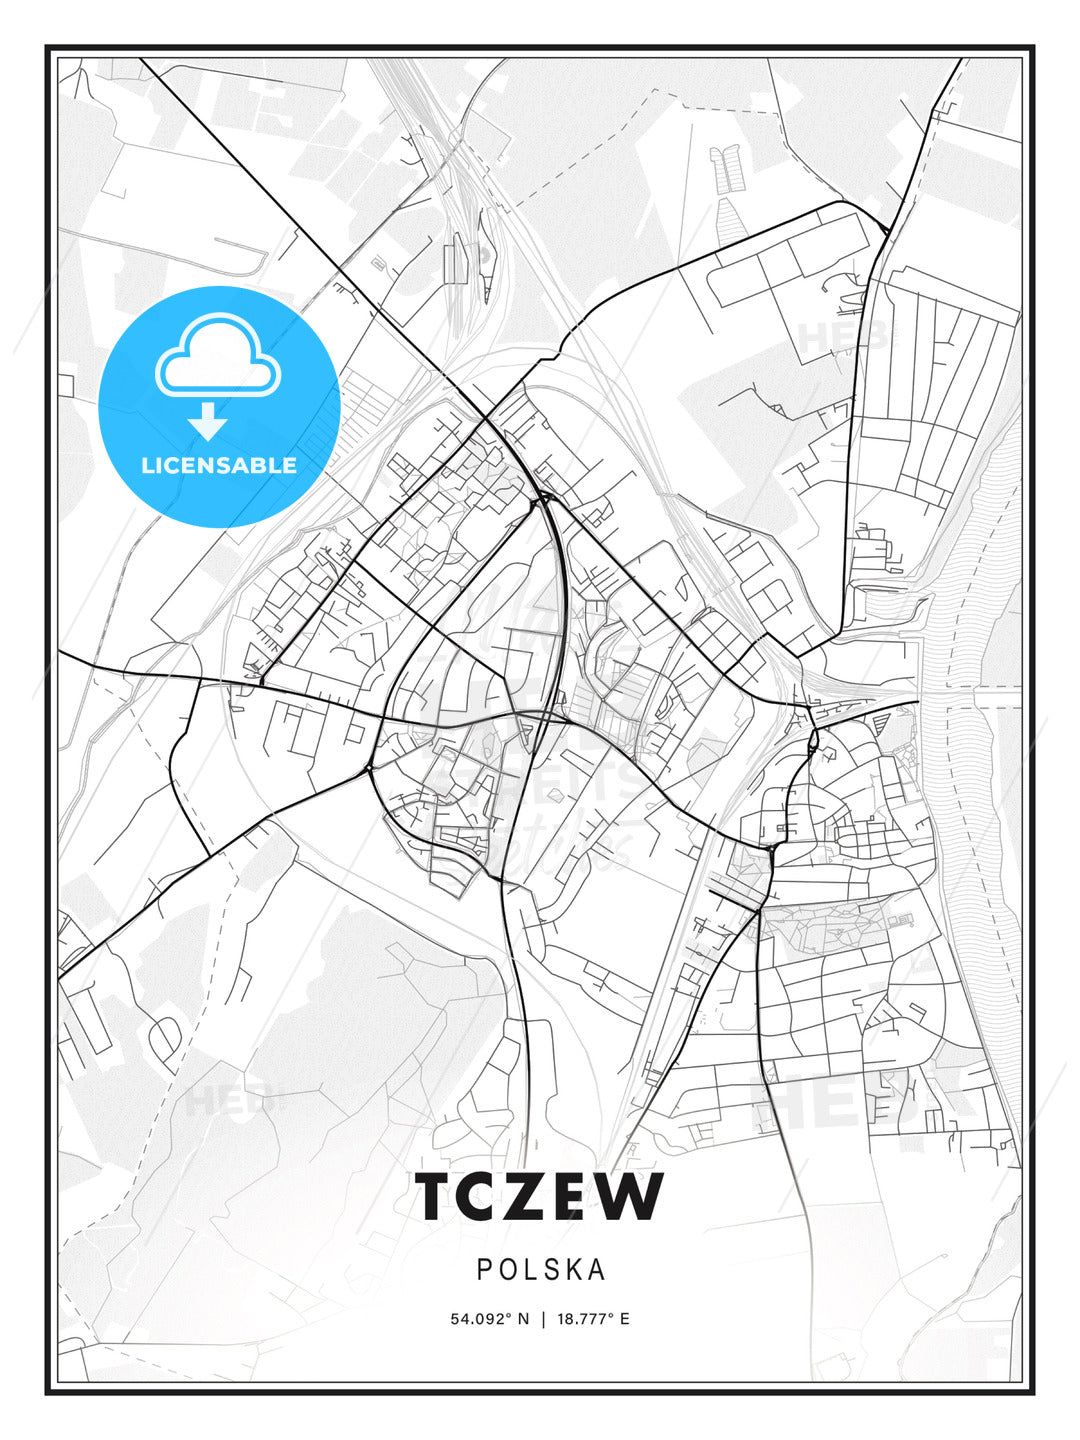 Tczew, Poland, Modern Print Template in Various Formats - HEBSTREITS Sketches